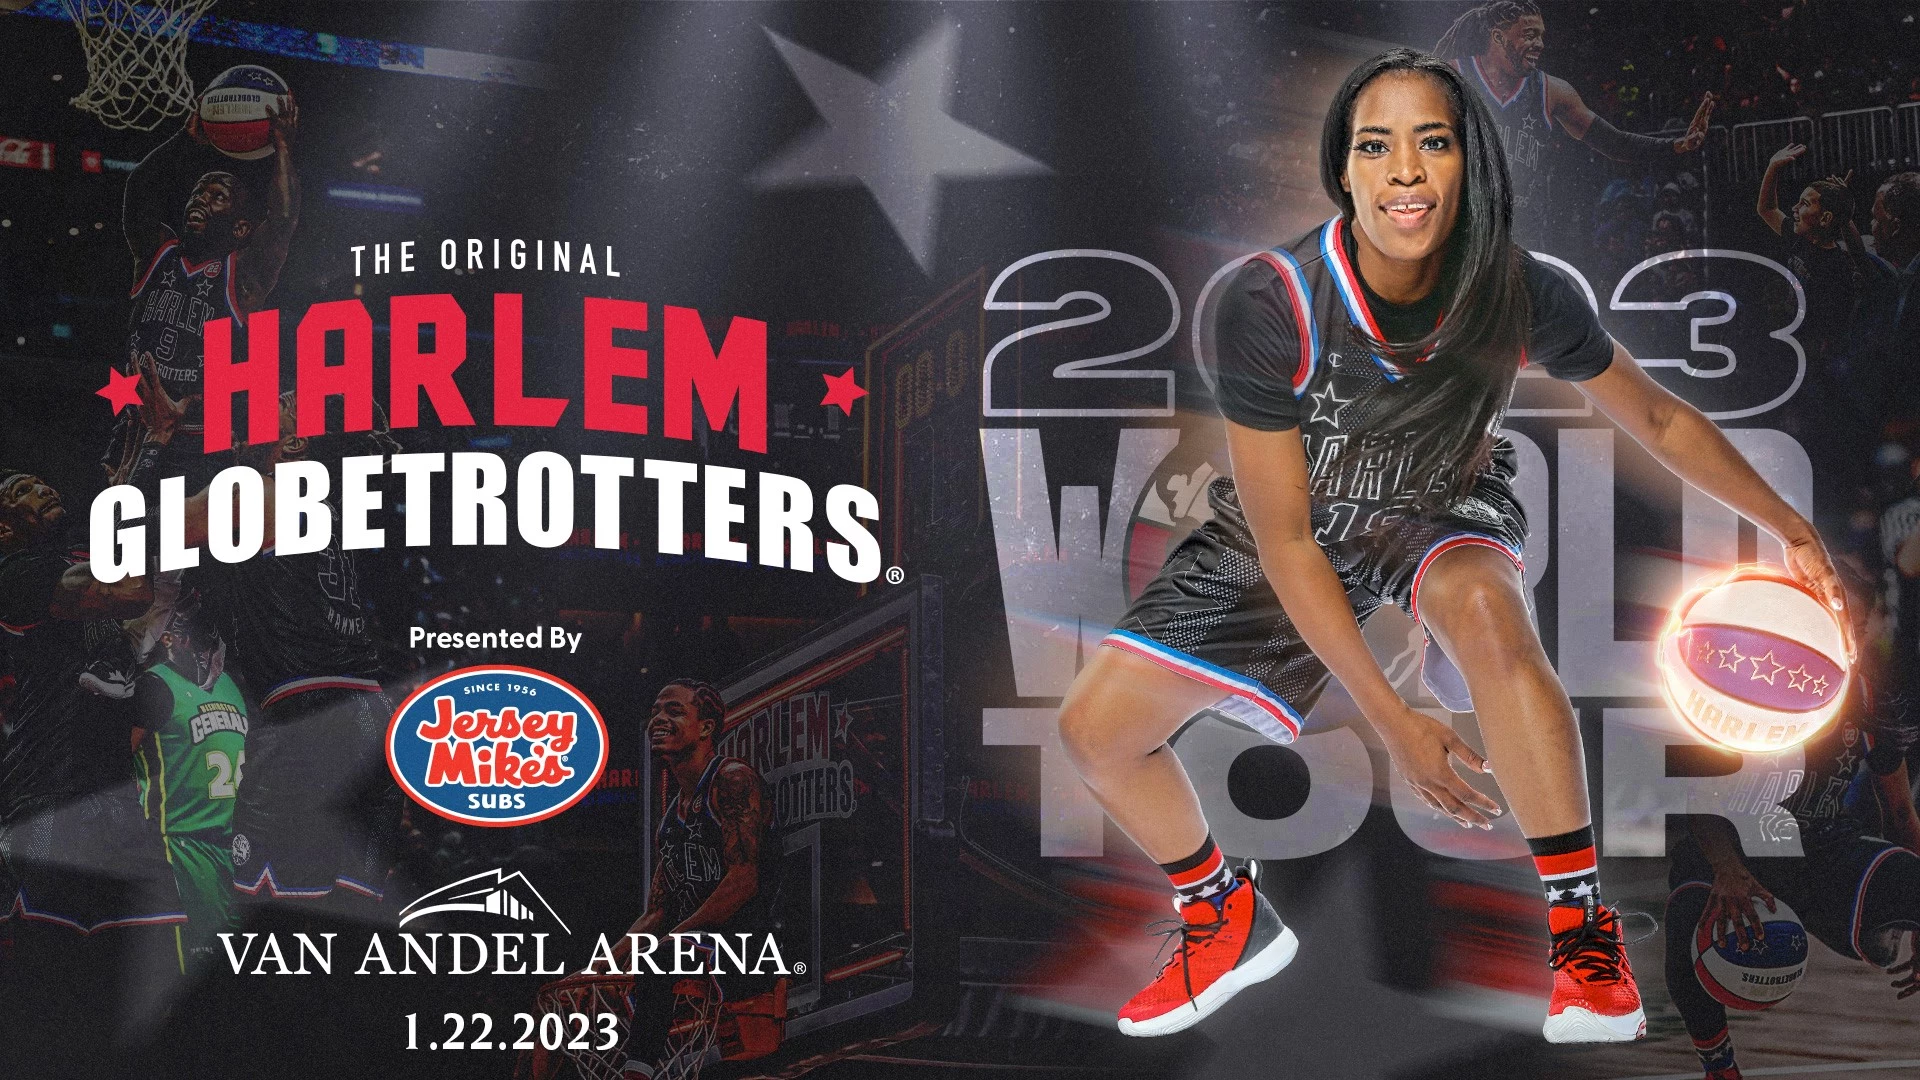 Harlem Globetrotters' 2010 World Tour brings high-flying fun to